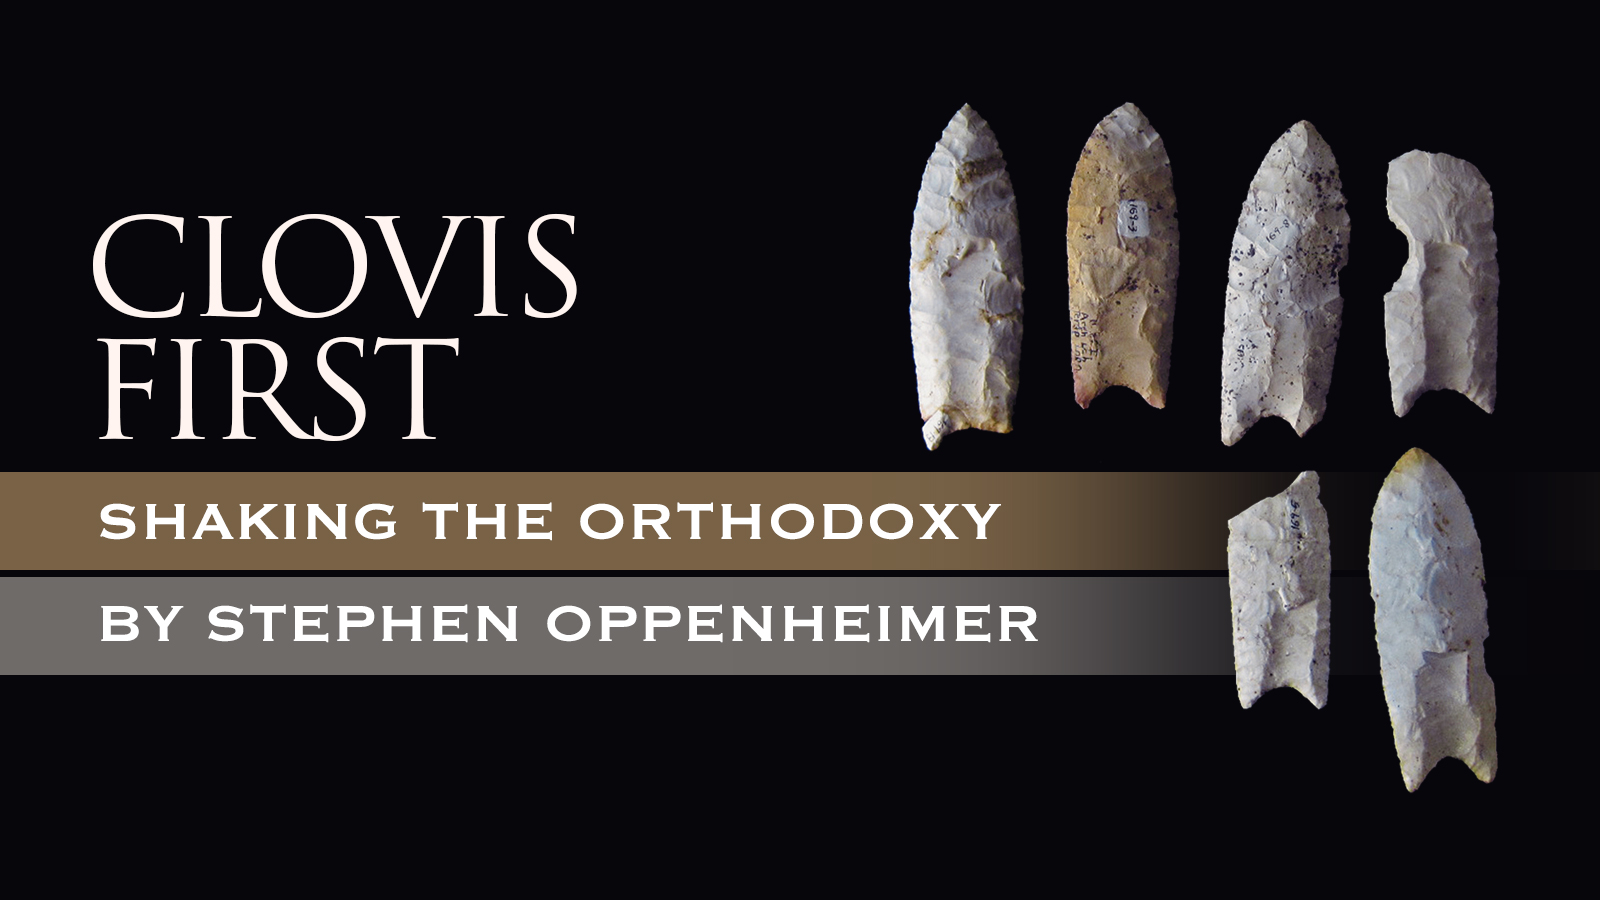 Clovis First: Shaking the Orthodoxy